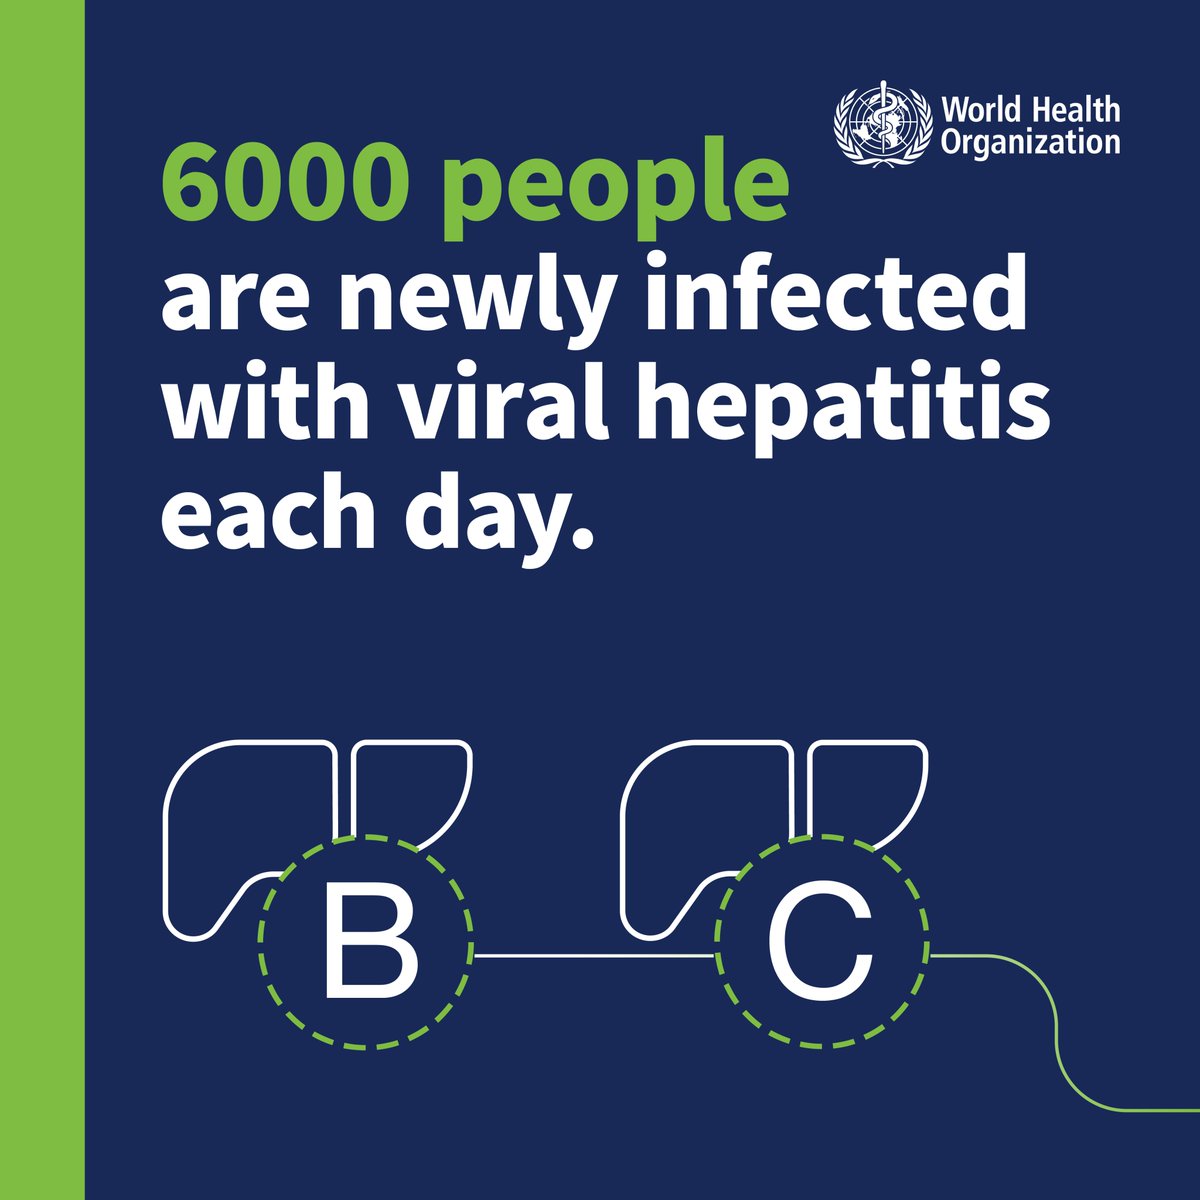 More than 6000 people are getting newly infected with viral #hepatitis each day. Updated WHO estimates indicate, in 2022: 🅱️ 254 million people were living with hepatitis B ©️ 50 million with hepatitis C 🔗 bit.ly/43Pzpeq